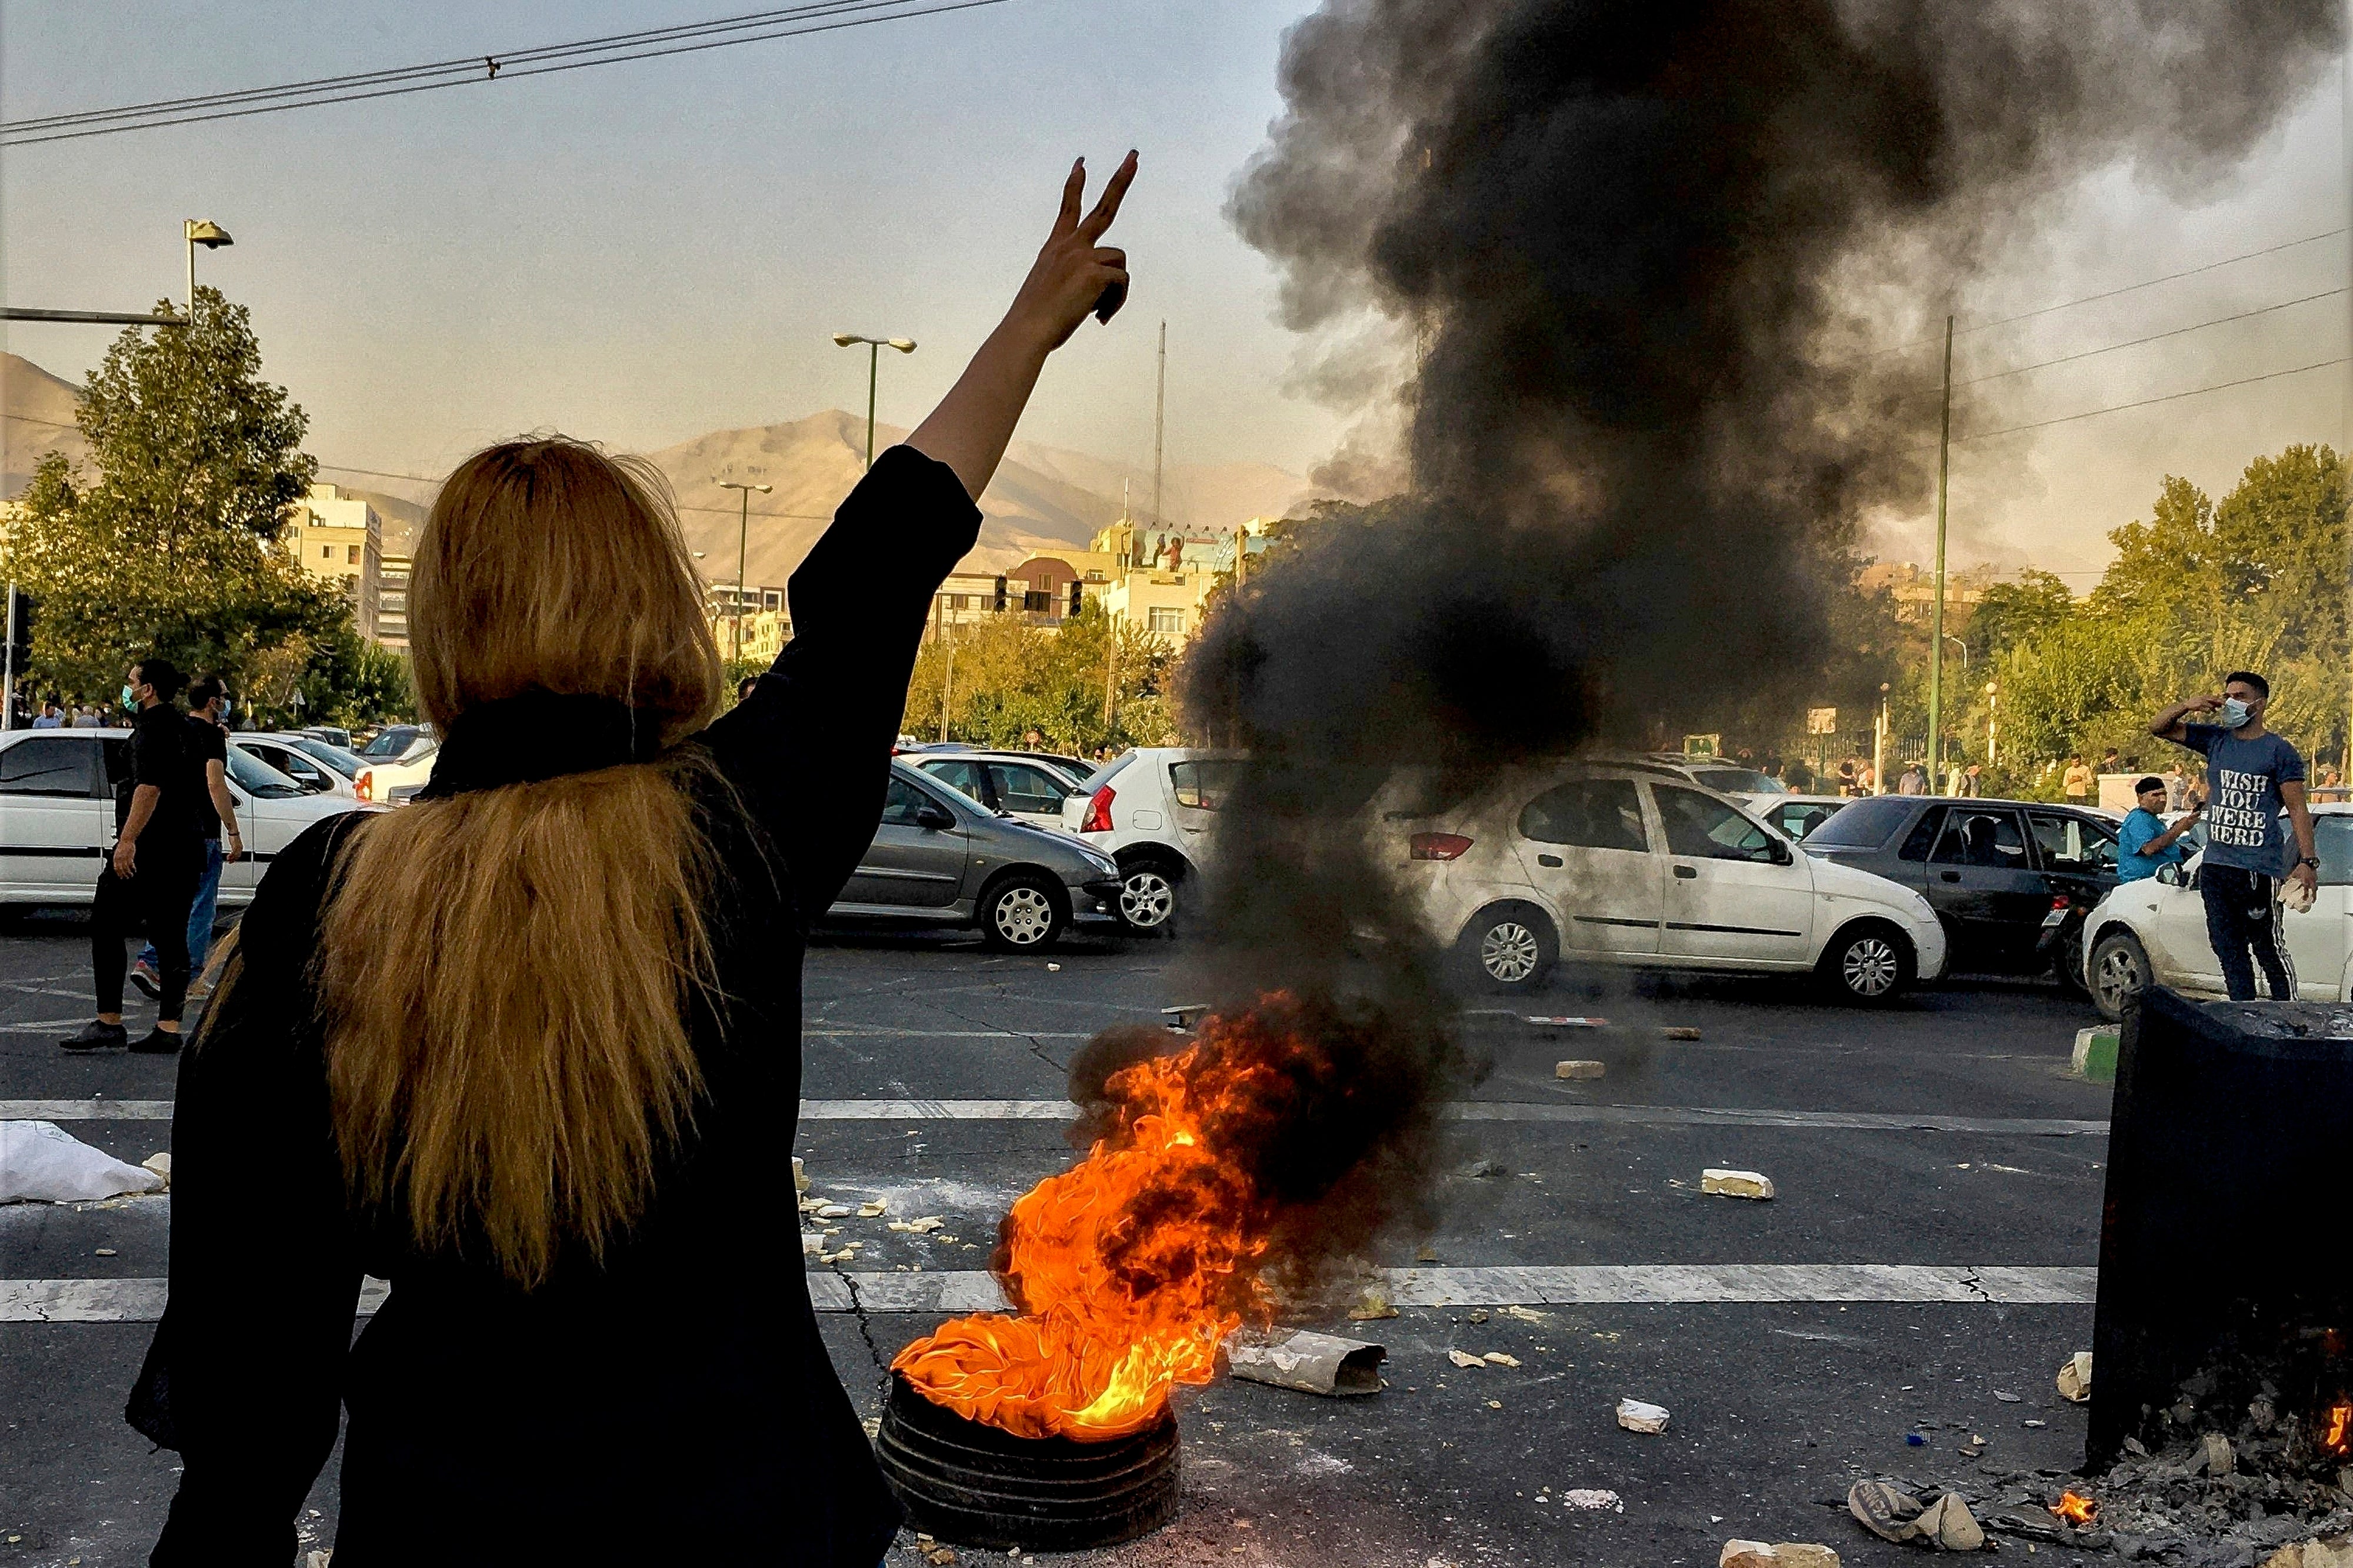 Iranians have been protesting since September last year following the death of Mahsa Amini